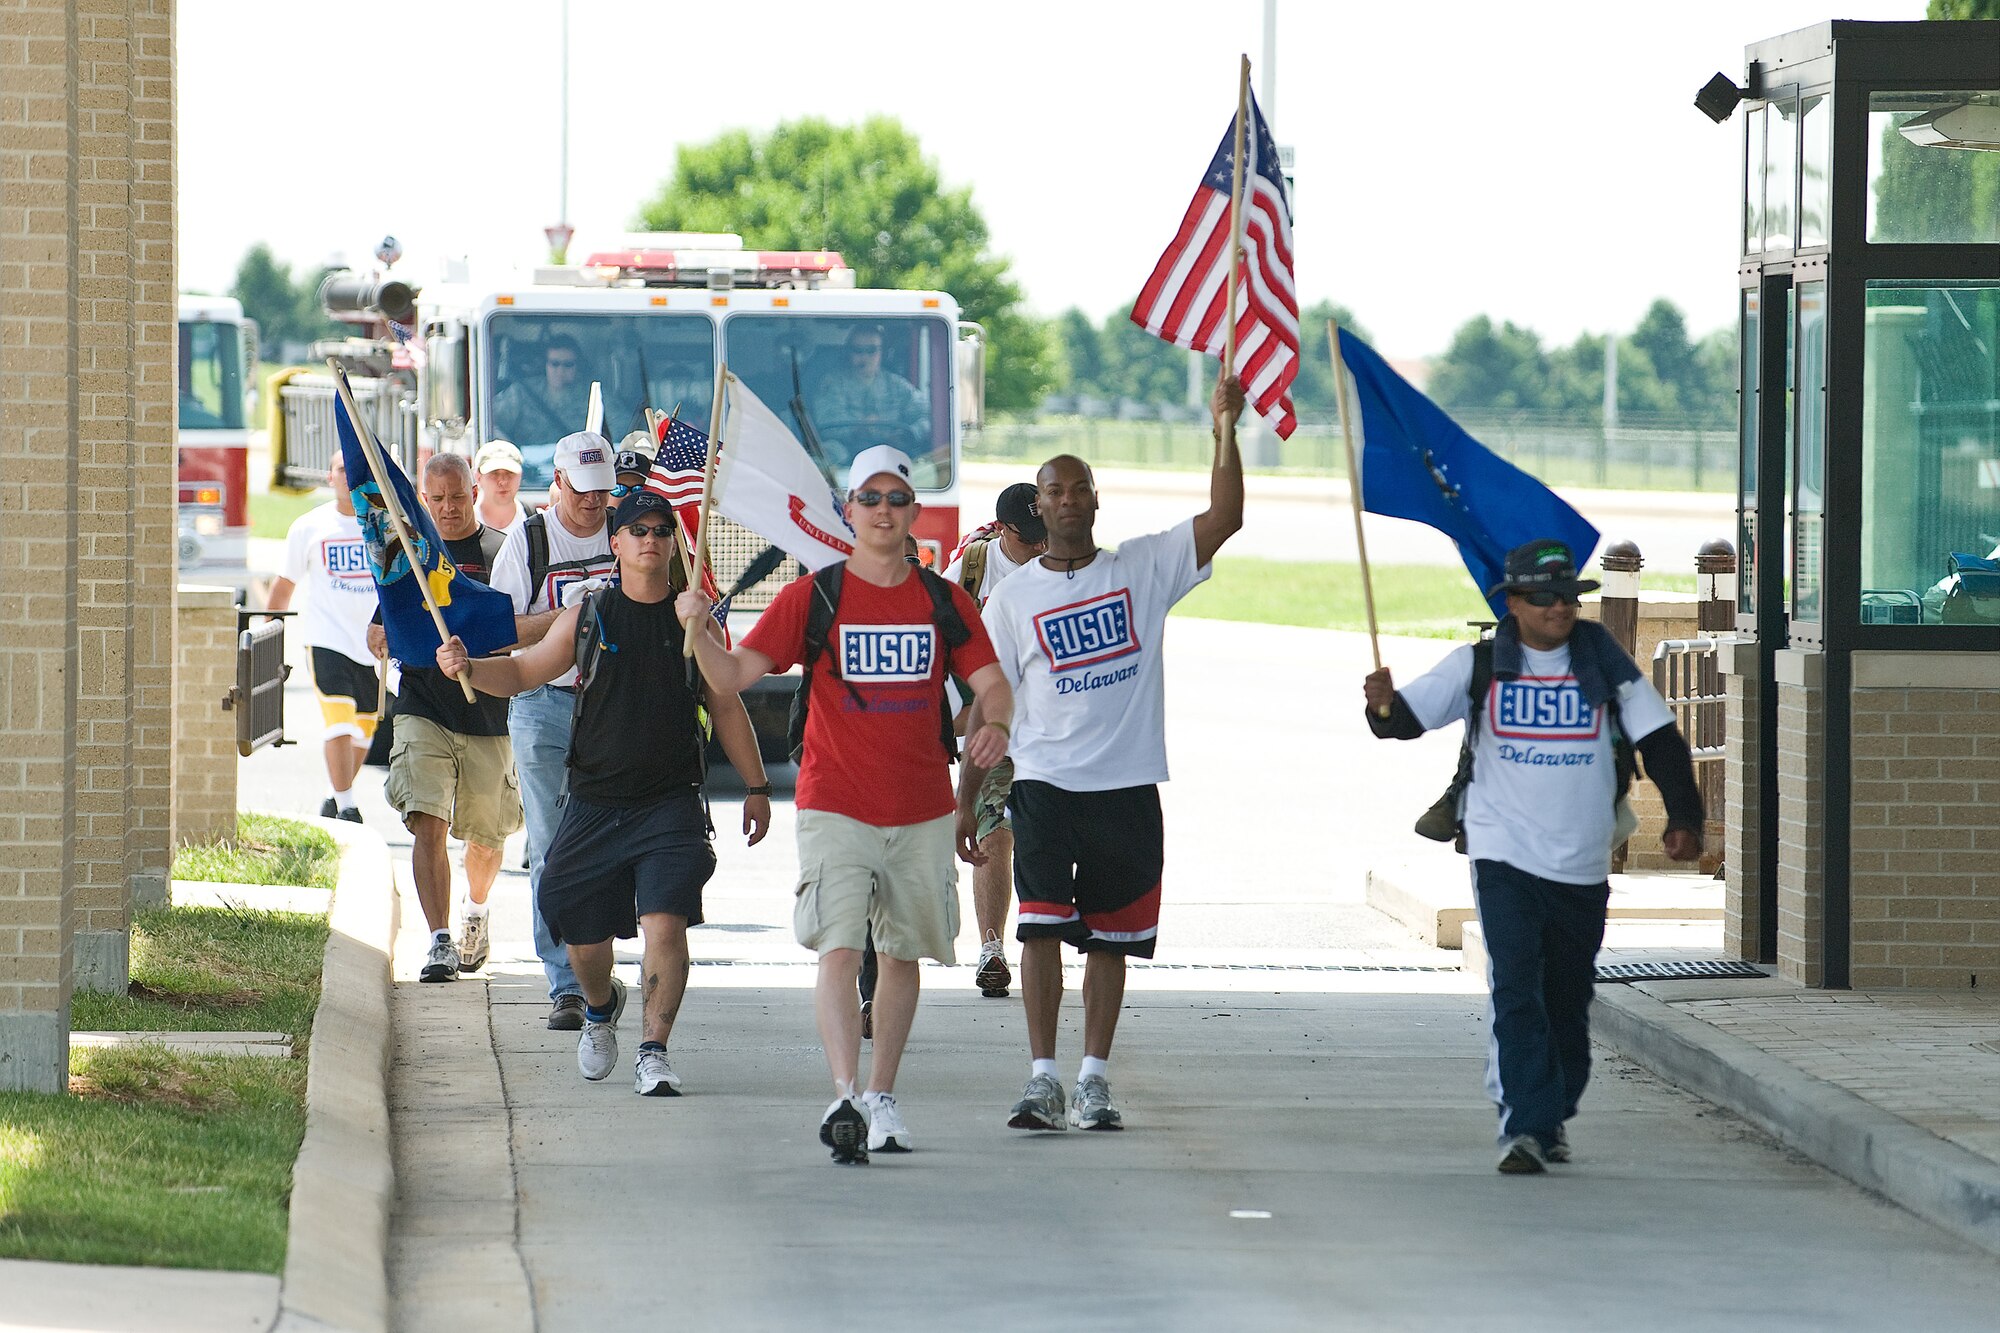 Participants in the 2010 USO Base 2 Base march enter the main gate at Dover Air Force Base, Del., May 21, 2010. The March is a 47-mile journey that starts at Delaware Air National Guard Headquarters and ends at Dover AFB. (U.S. Air Force photo/Roland Balik)